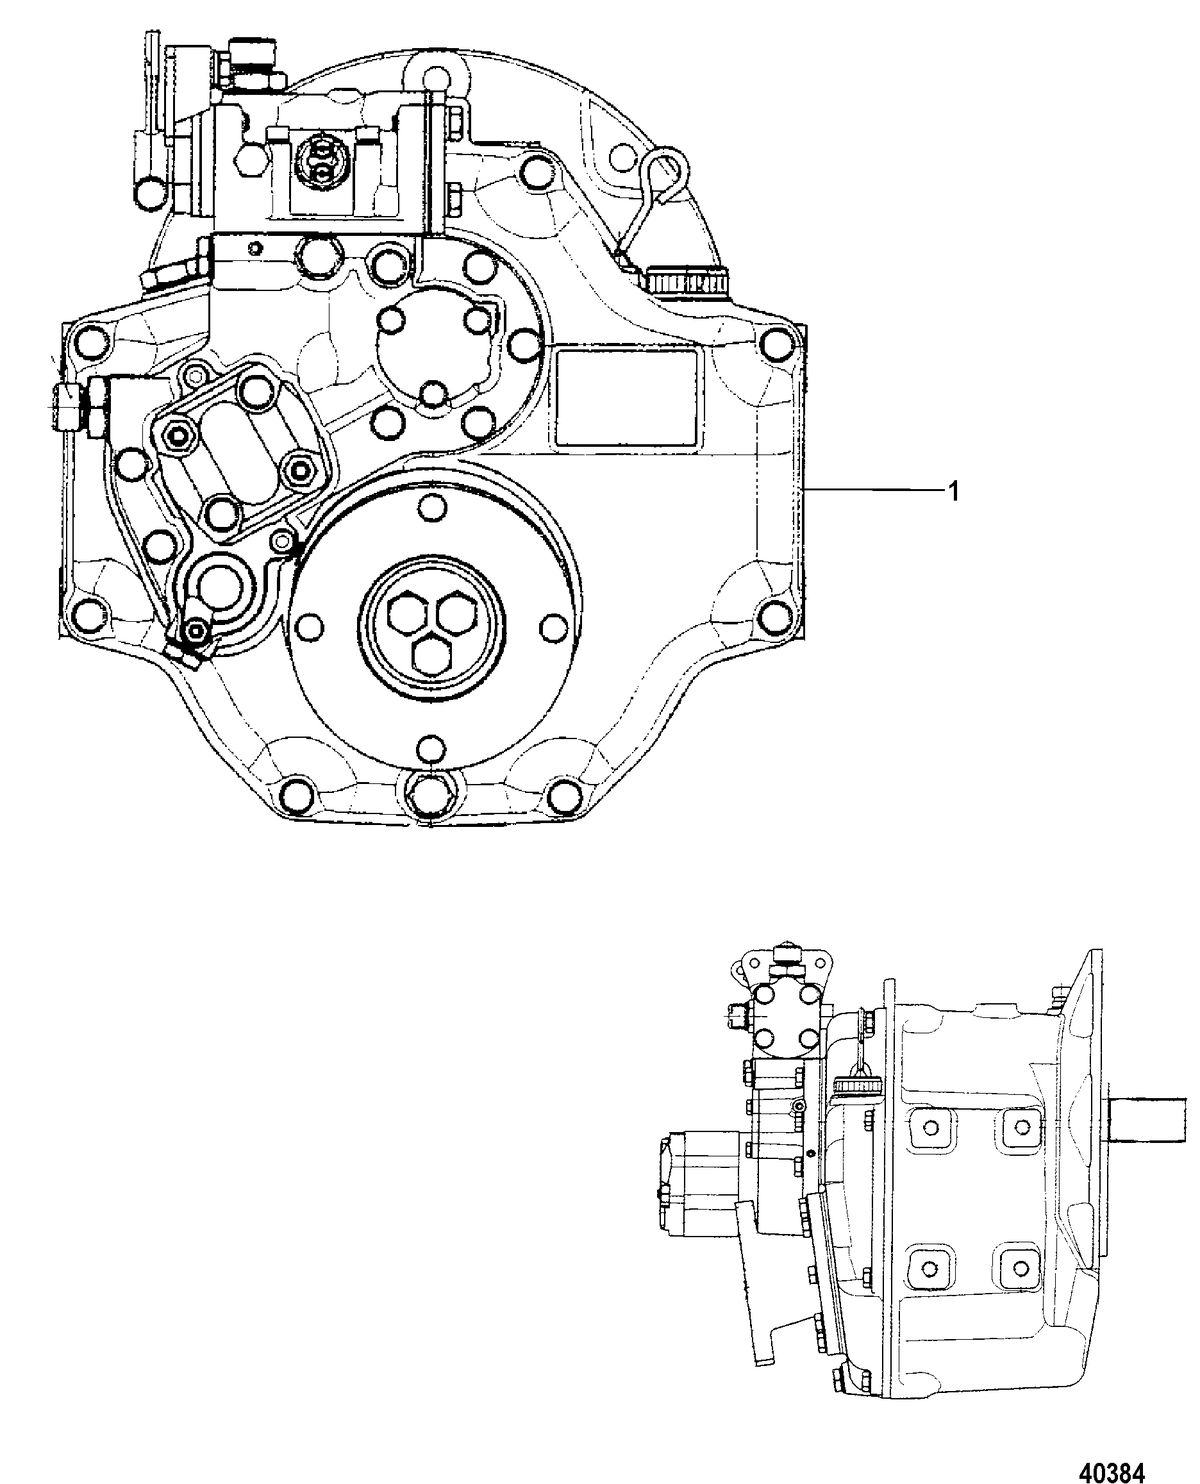 MERCRUISER 2.0L I4 150-170HP DIESEL Transmission and Related Parts (Inboard), Technodrive 485